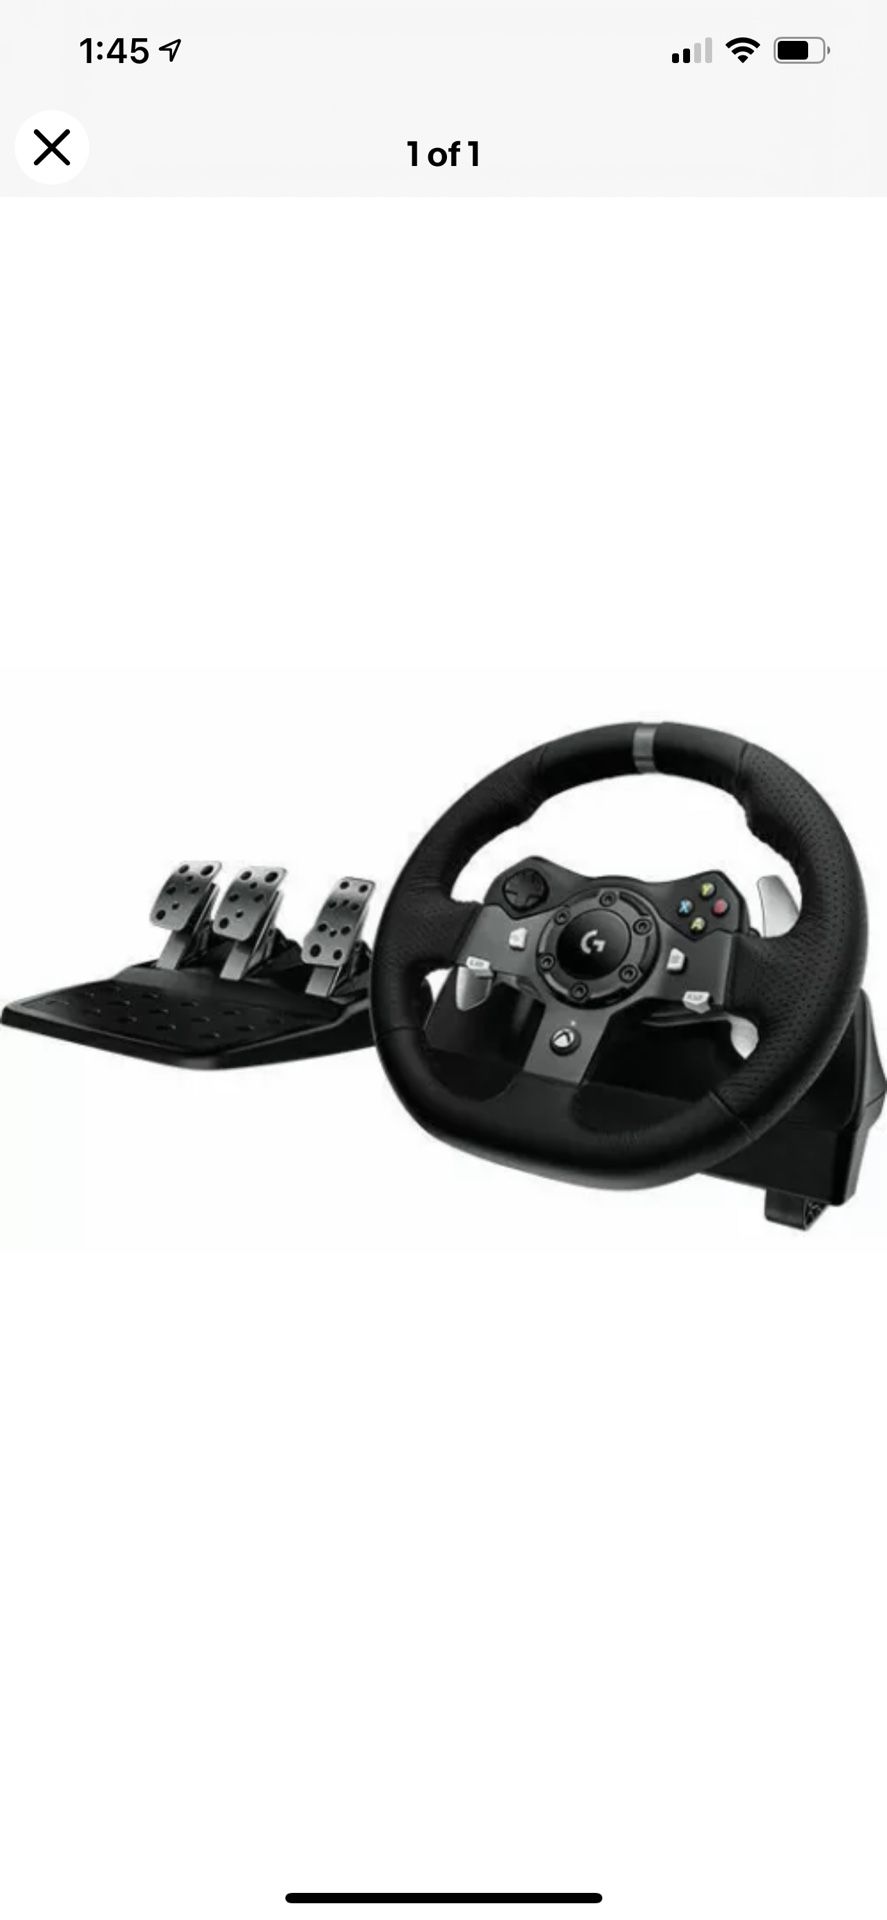 Logitech G920 Driving Force Racing Wheel with Pedals (with Original Box)